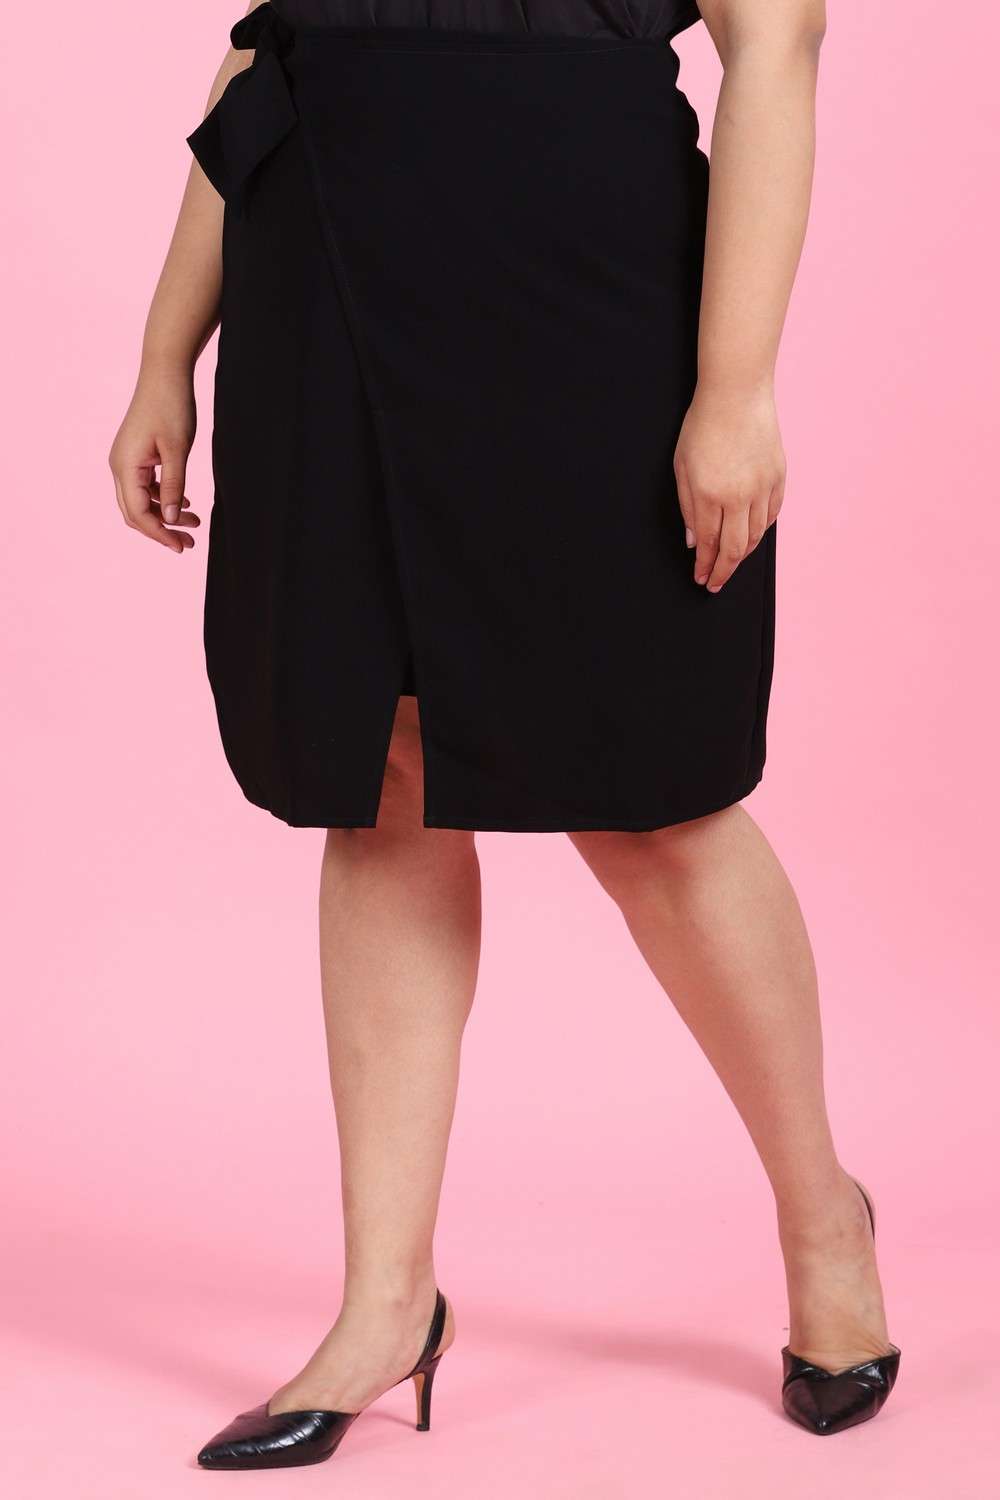 Has anyone tried the Wilfred Movement Skirt and know how true to size it  runs My usual size is 0 for bottoms 24 in waist 35 hip but the auto size  recommendation